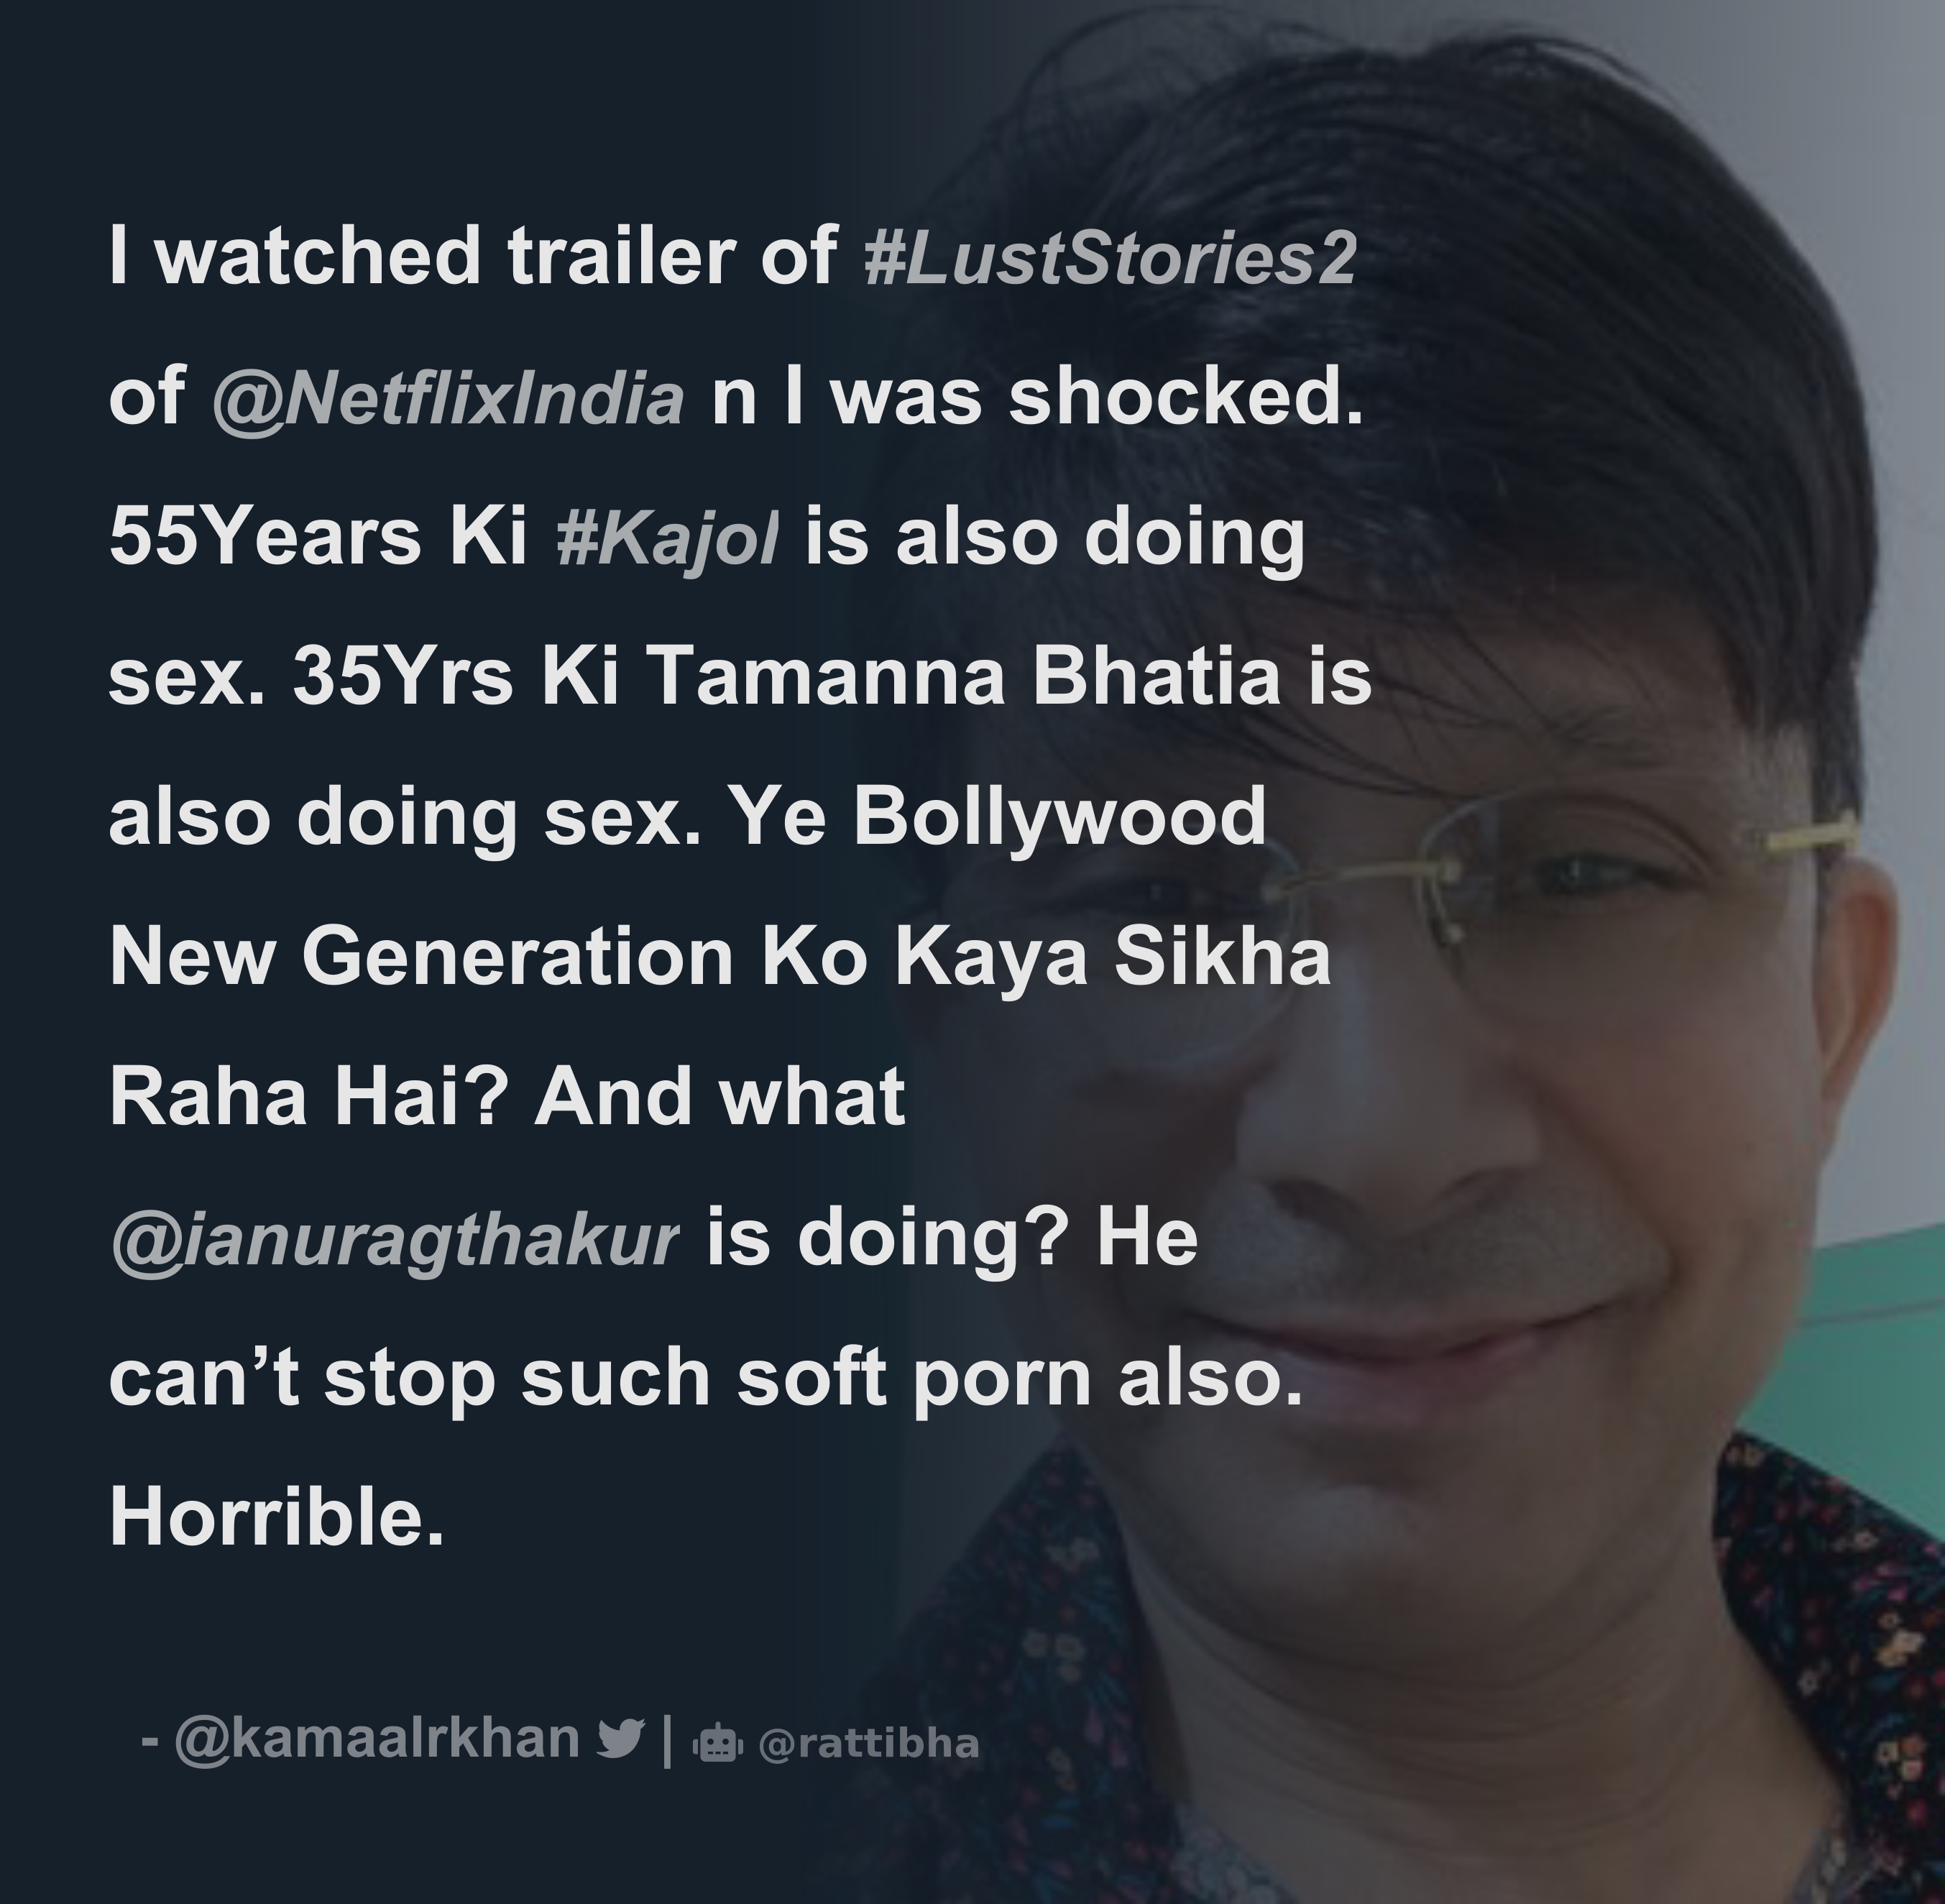 Tamanna Sex Image Download - I watched trailer of #LustStories2 of @NetflixIndia n I was shocked.  55Years Ki #Kajol is also doing sex. 35Yrs Ki Tamanna Bhatia is also doing  sex. Y - Thread from KRK @kamaalrkhan -